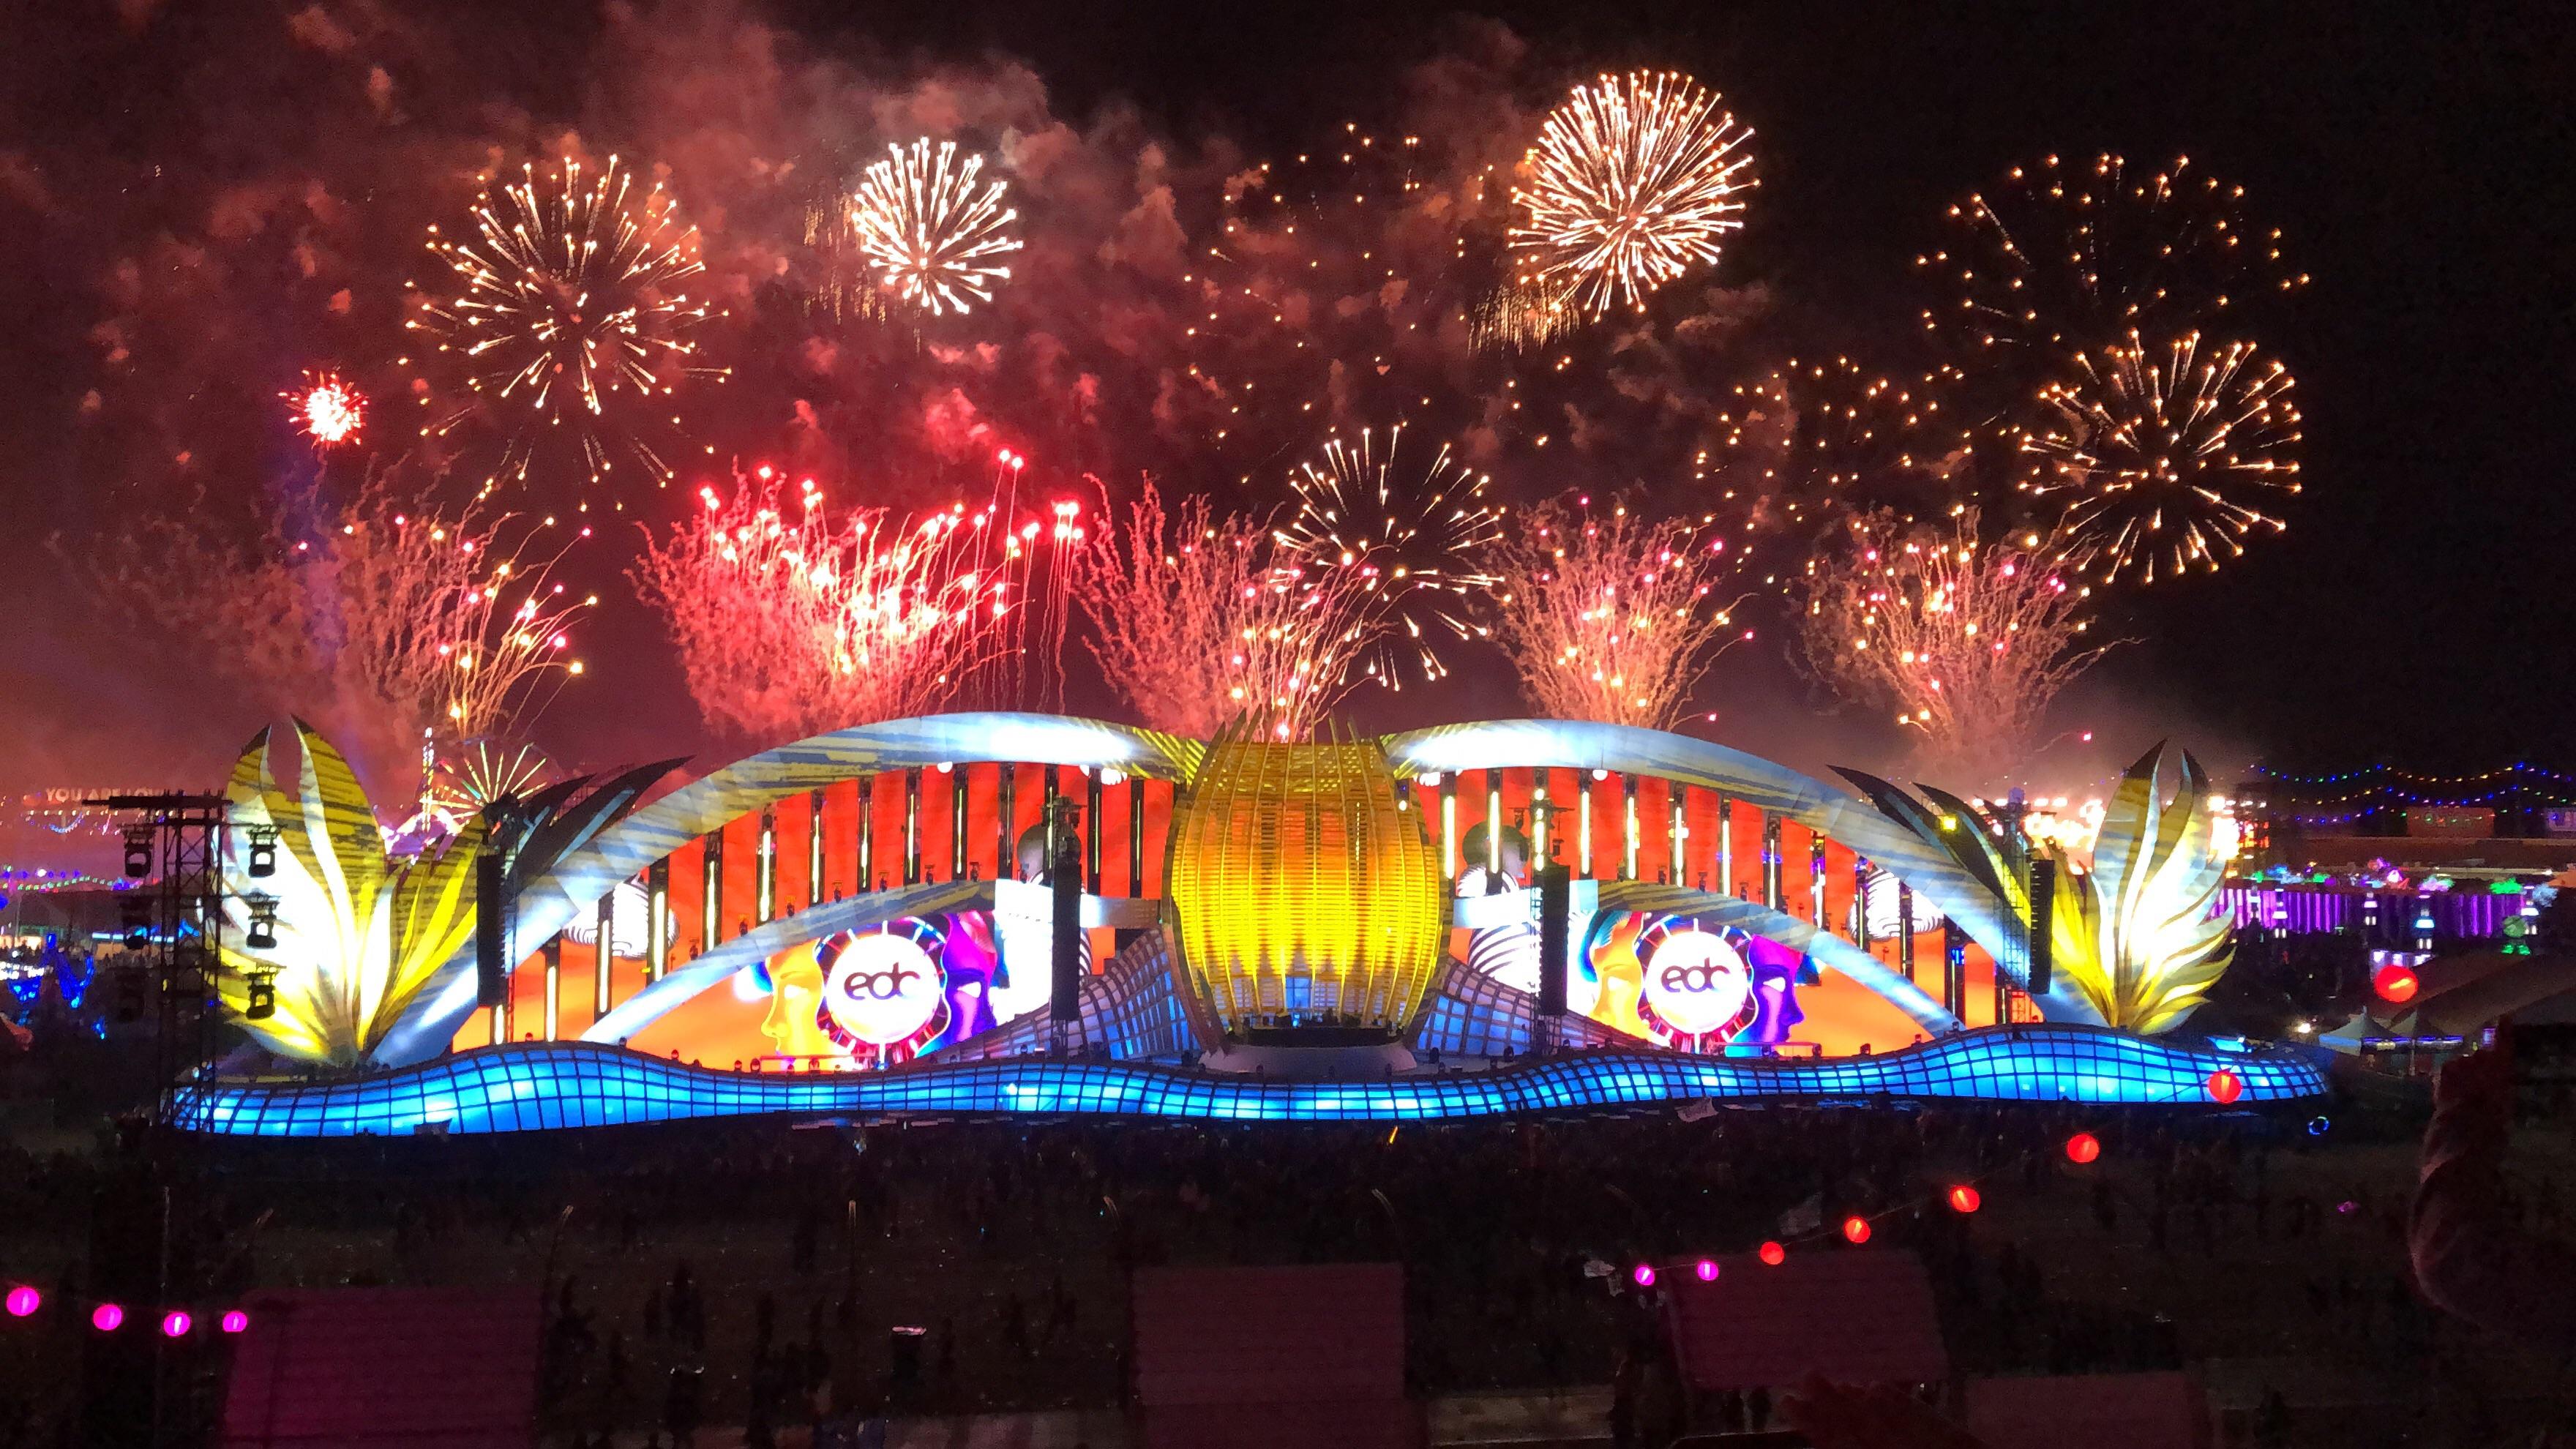 Cosmic Meadow stage with fireworks going off behind it